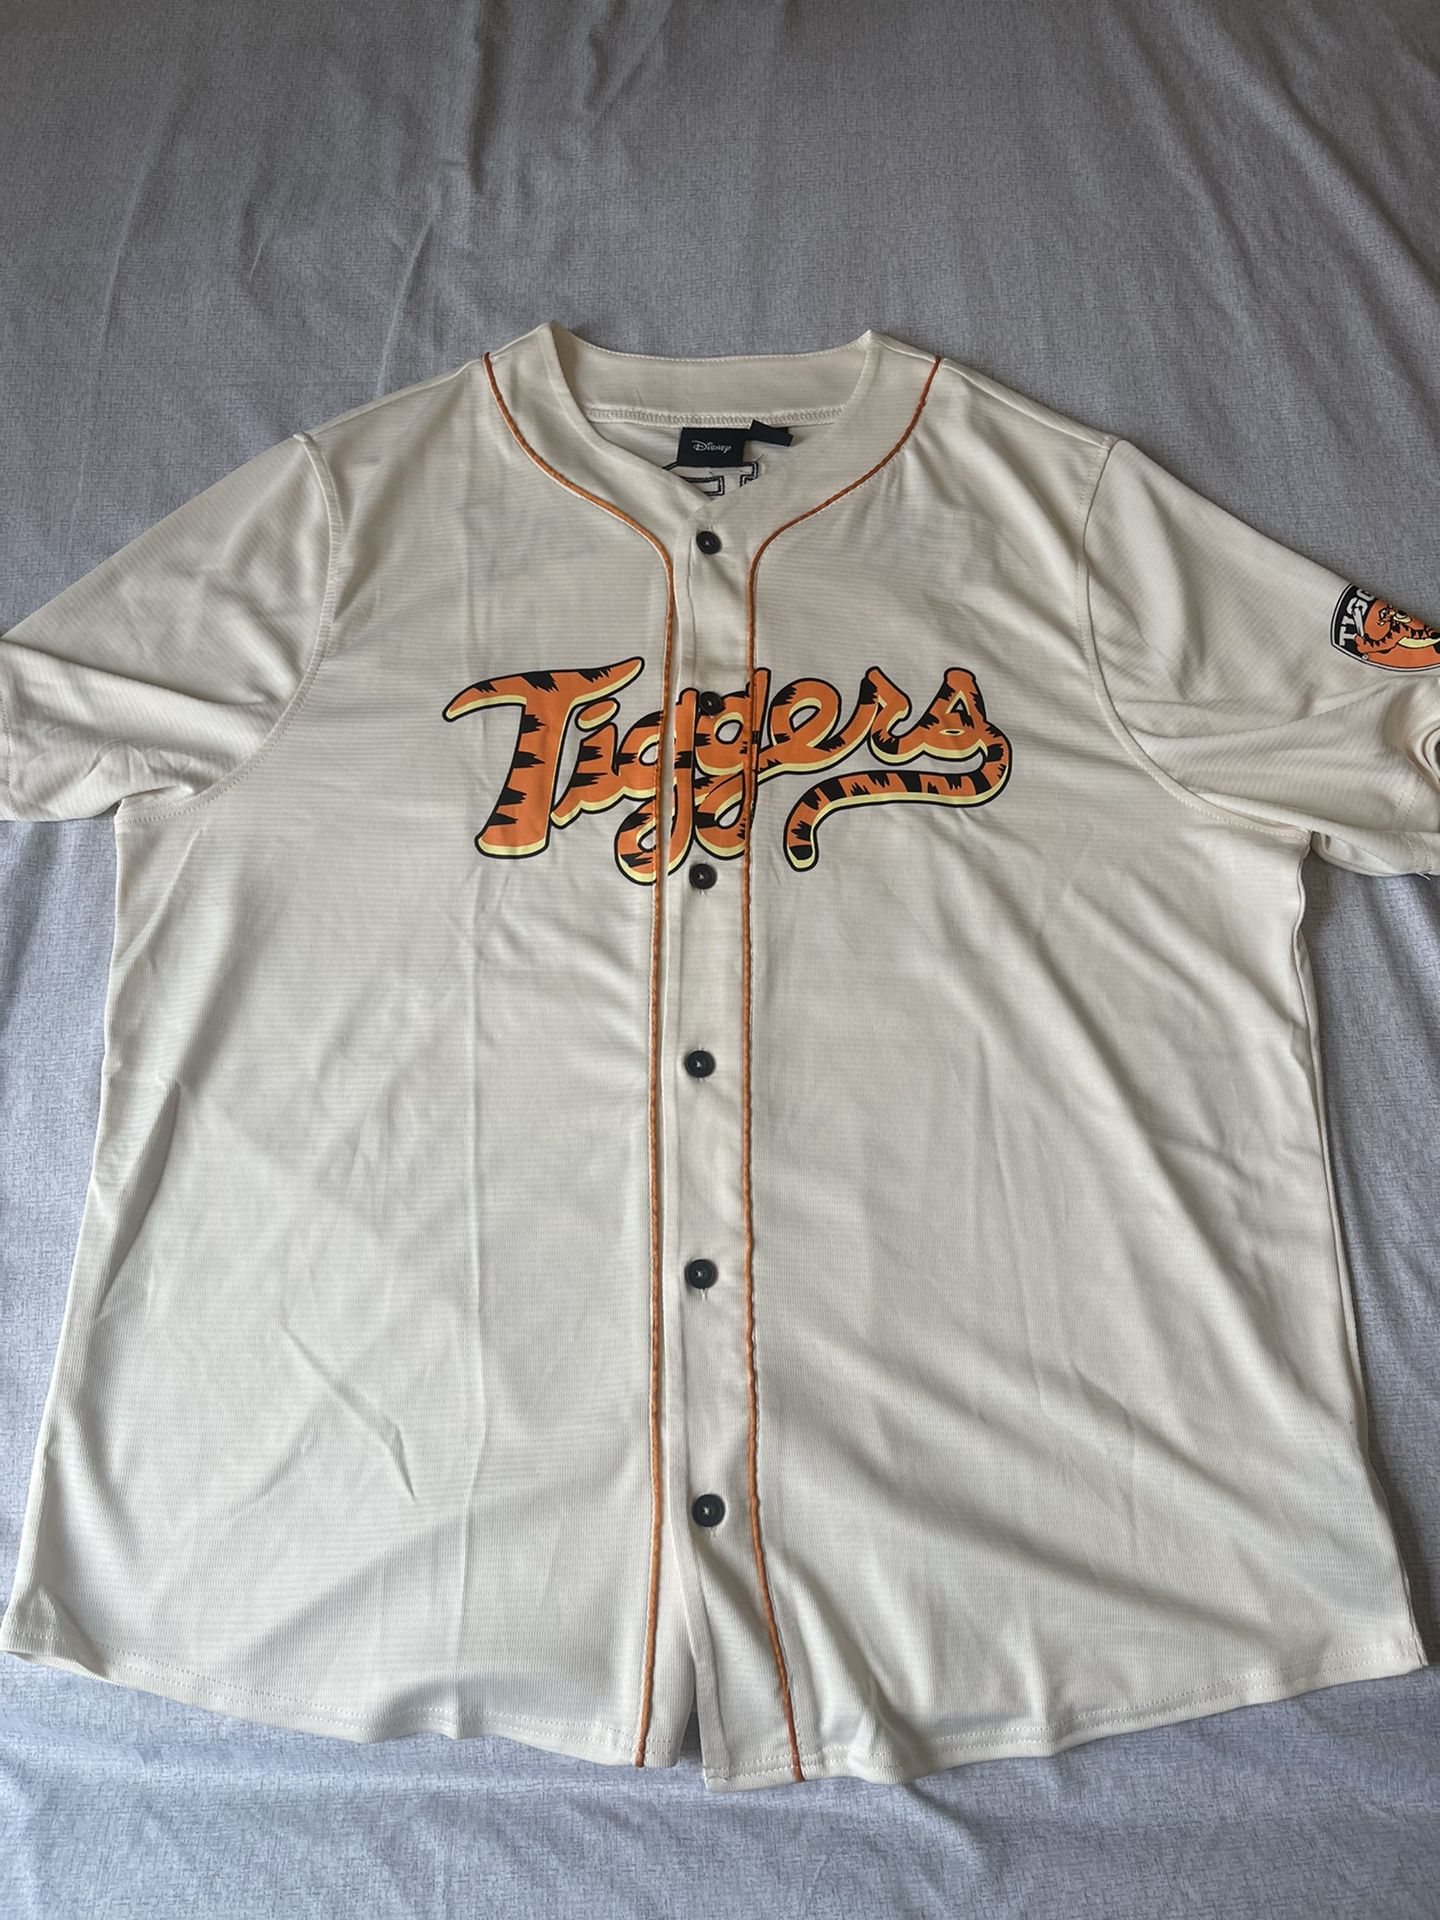 Yankees Majestic Jersey No Name No Number Size Large for Sale in Pasadena,  TX - OfferUp